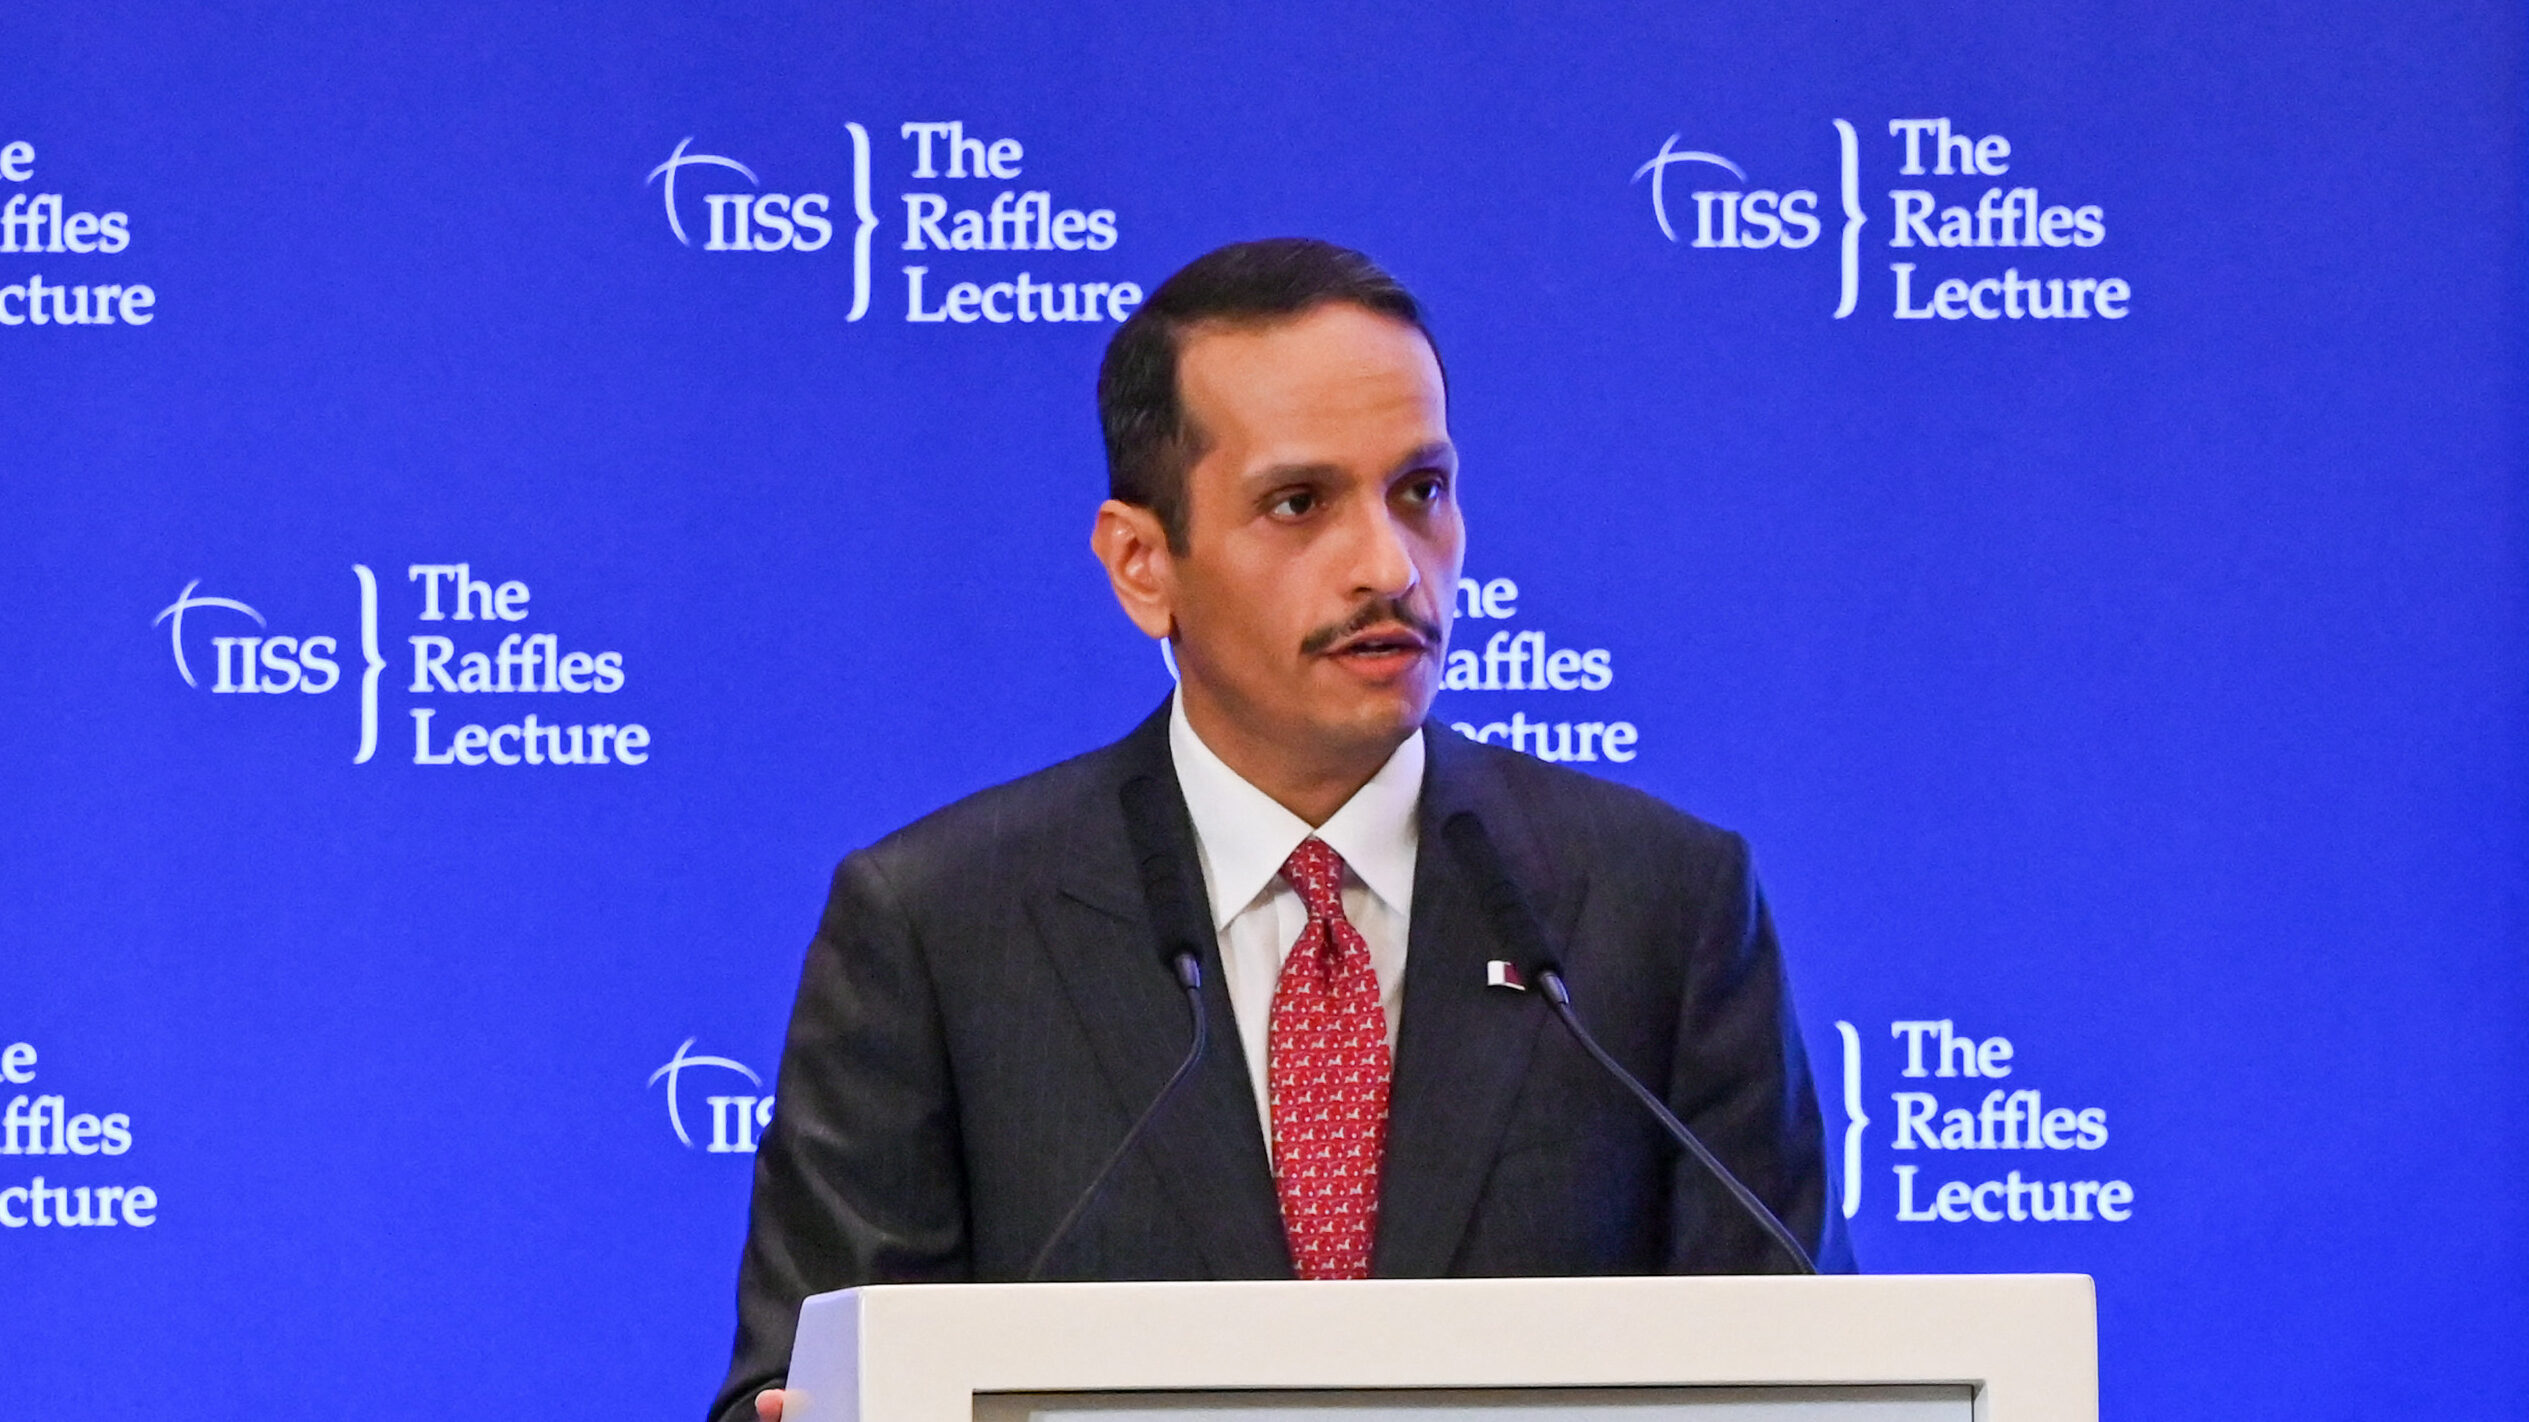 Balancing act: Asked about China’s Middle East arms sales, Qatari PM lauds US ‘defense alliance’